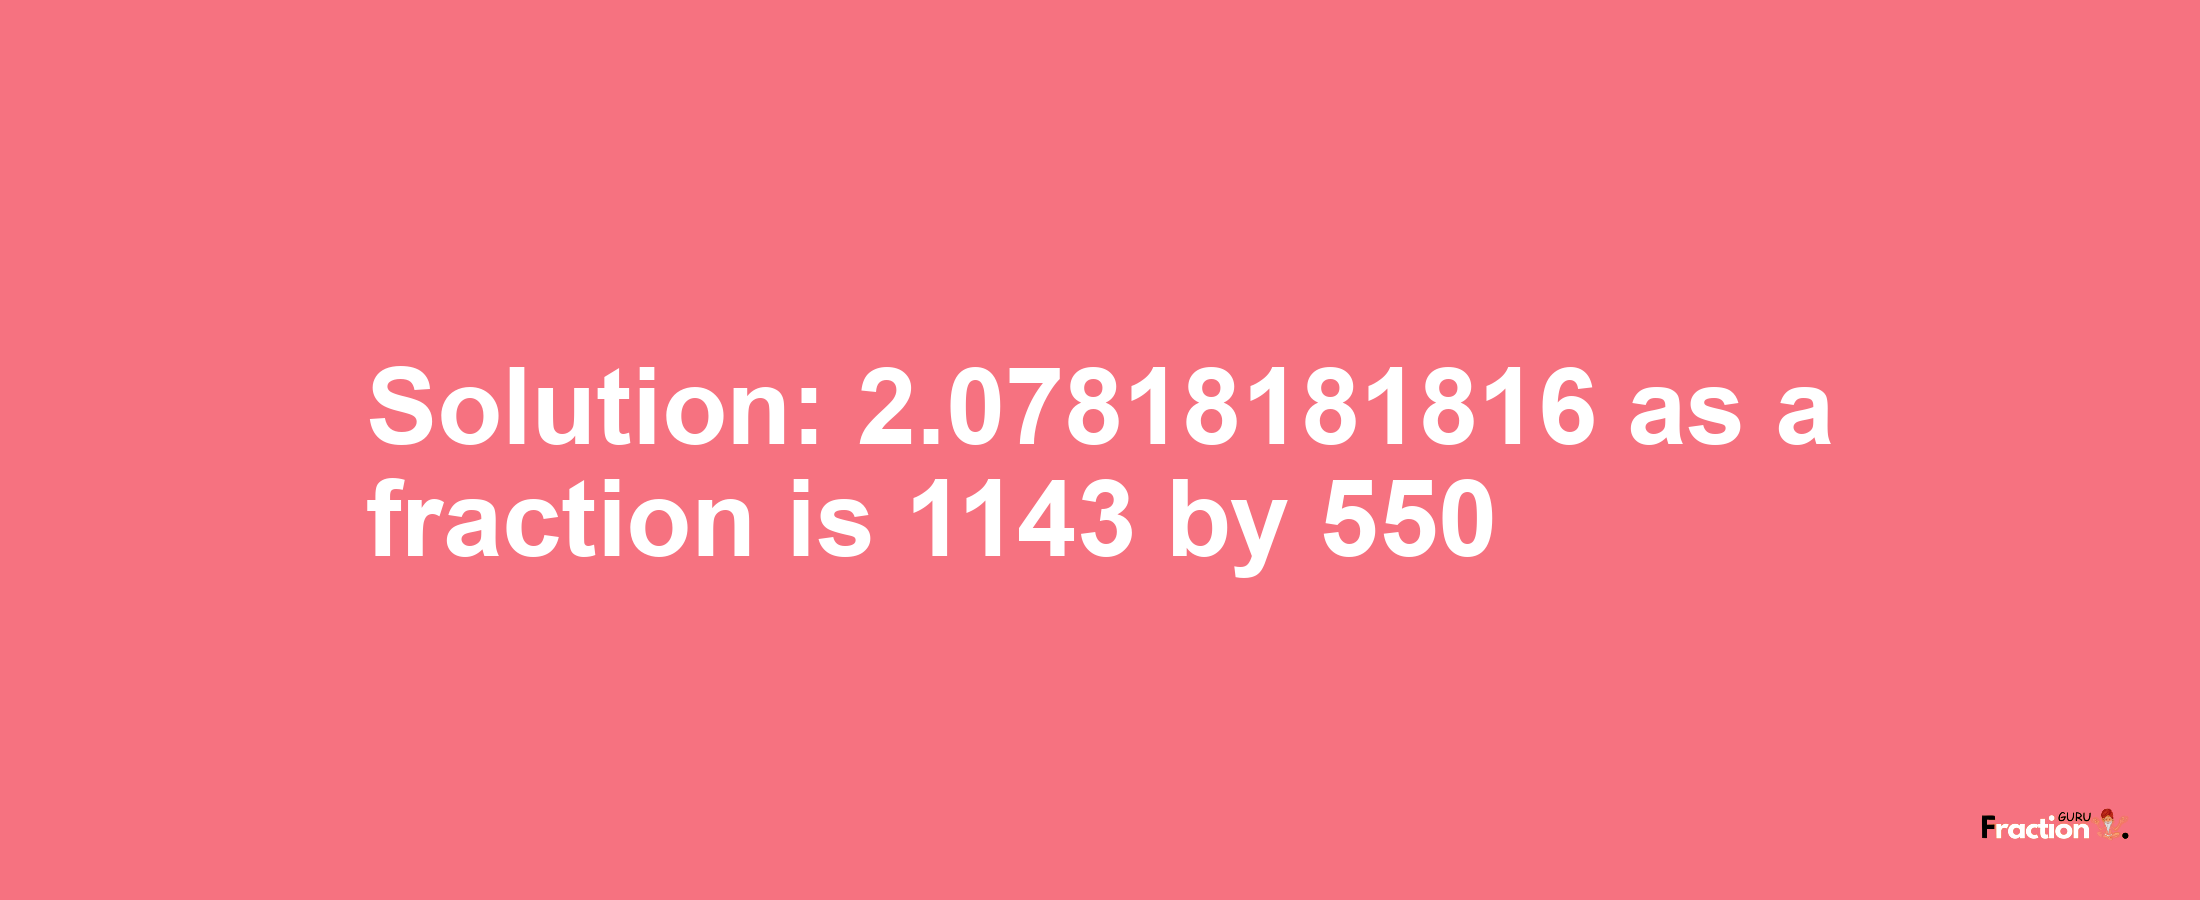 Solution:2.07818181816 as a fraction is 1143/550